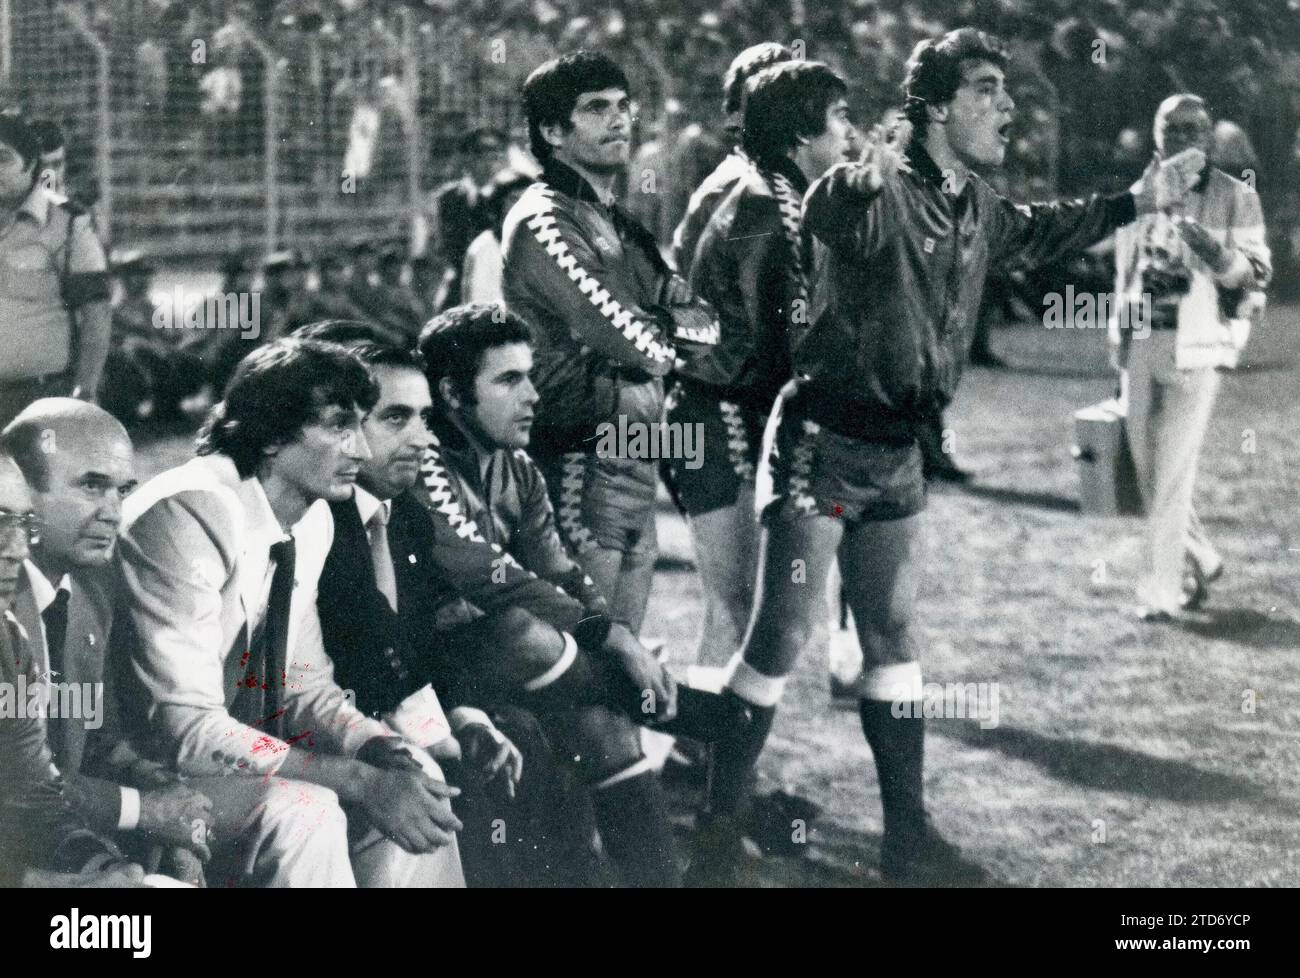 Betis bench during the Benfica-Betis match, the first leg corresponding to the first UEFA Cup Qualifier of the 1982-83 season, the 75th anniversary of Verdiblanco's founding. From left to right, sitting, you see Vicente Montiel, Masseuse; Juan Manuel Mauduit, President; Antal Dunai, Coach; Pedro Buenaventura, Technical Secretary, and the player Antonio Benítez. Standing you can see the players Ramón, corner and Cardeñosa. The match ended with a 2-1 victory for Benfica. In the Vuelta, at the Benito Villamarín stadium, the Portuguese won 1-2. (photo Ruesga bonus. Credit: Album / Archivo ABC / Ru Stock Photo